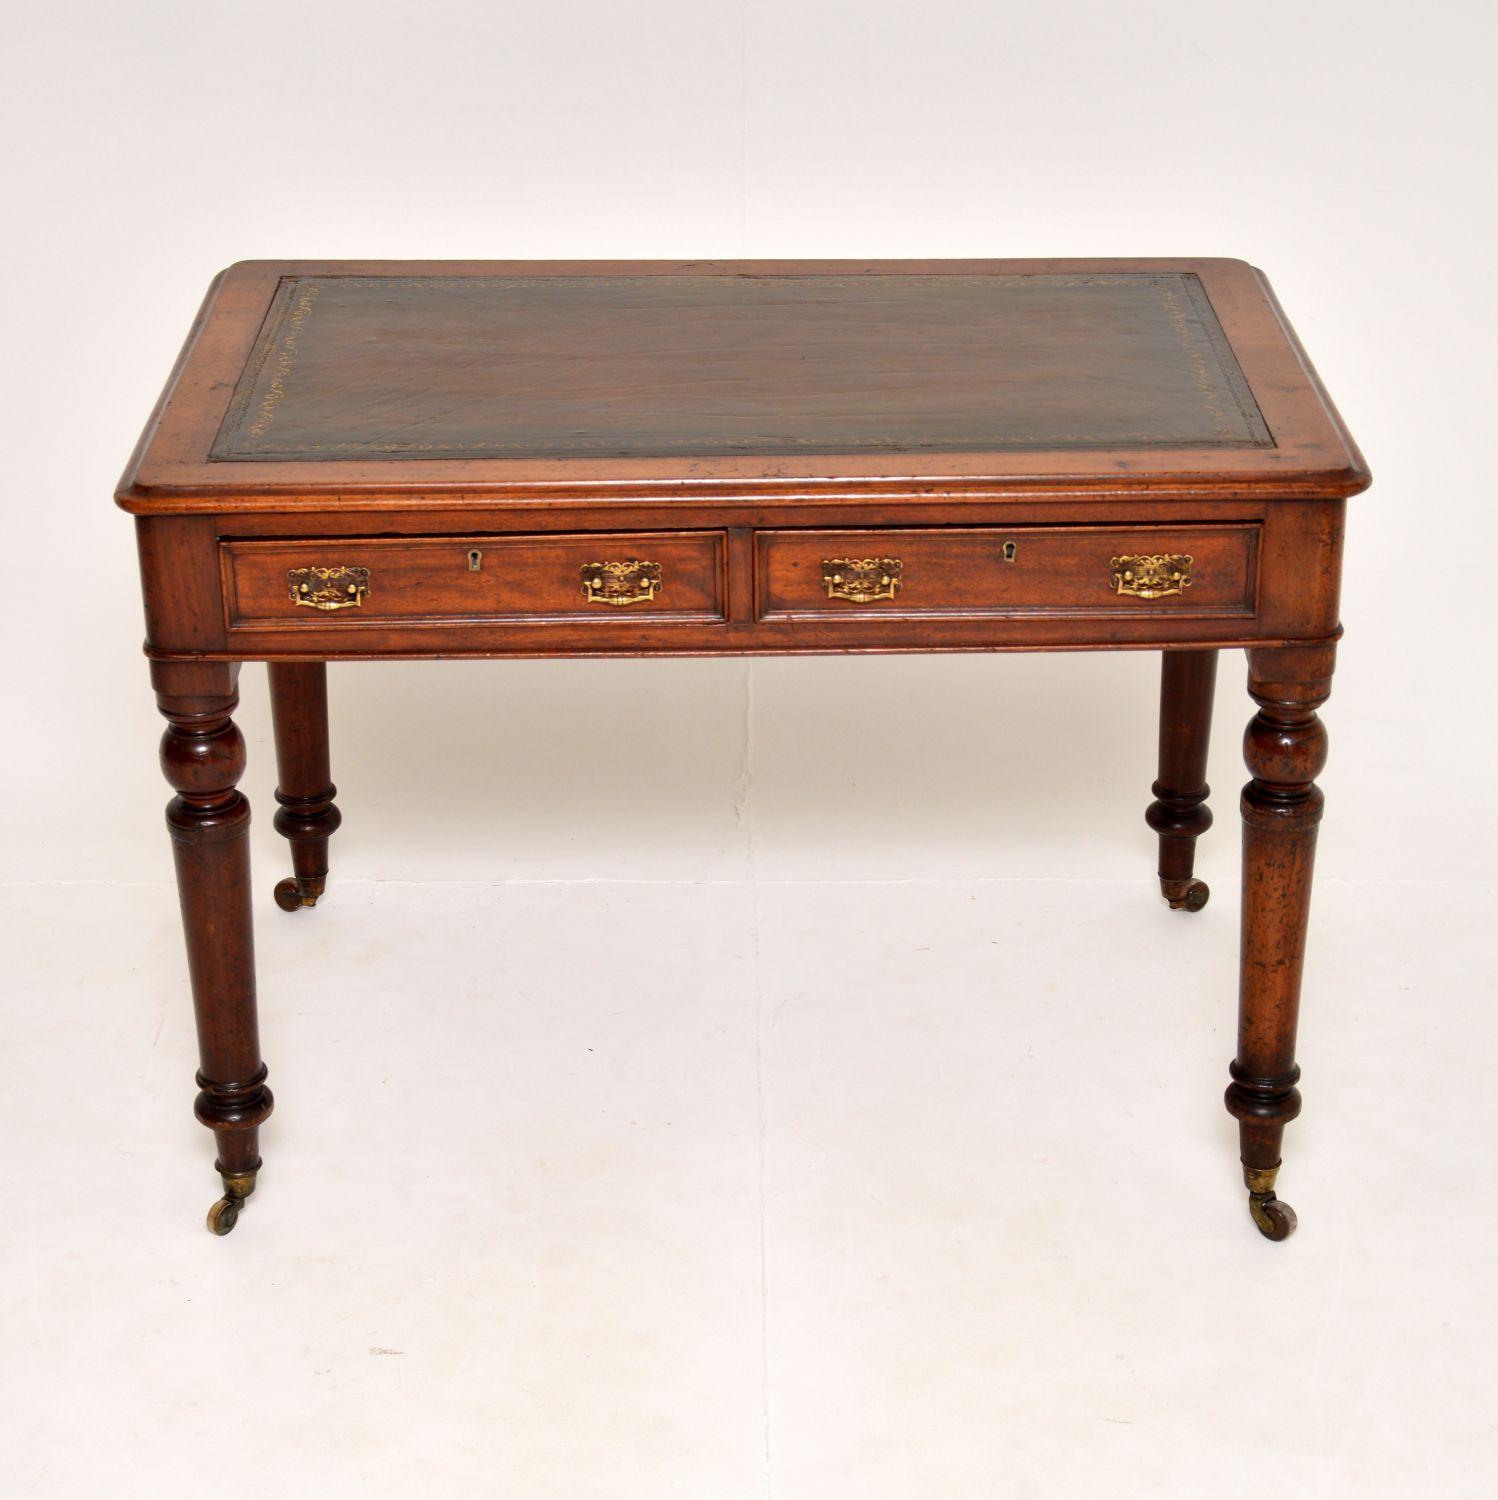 A fine antique Victorian period writing table in solid wood. This was made in England, it dates from around the 1860-1880 period.
It is of super quality and is of lovely proportions. There are beautifully turned solid wooden legs, brass handles and